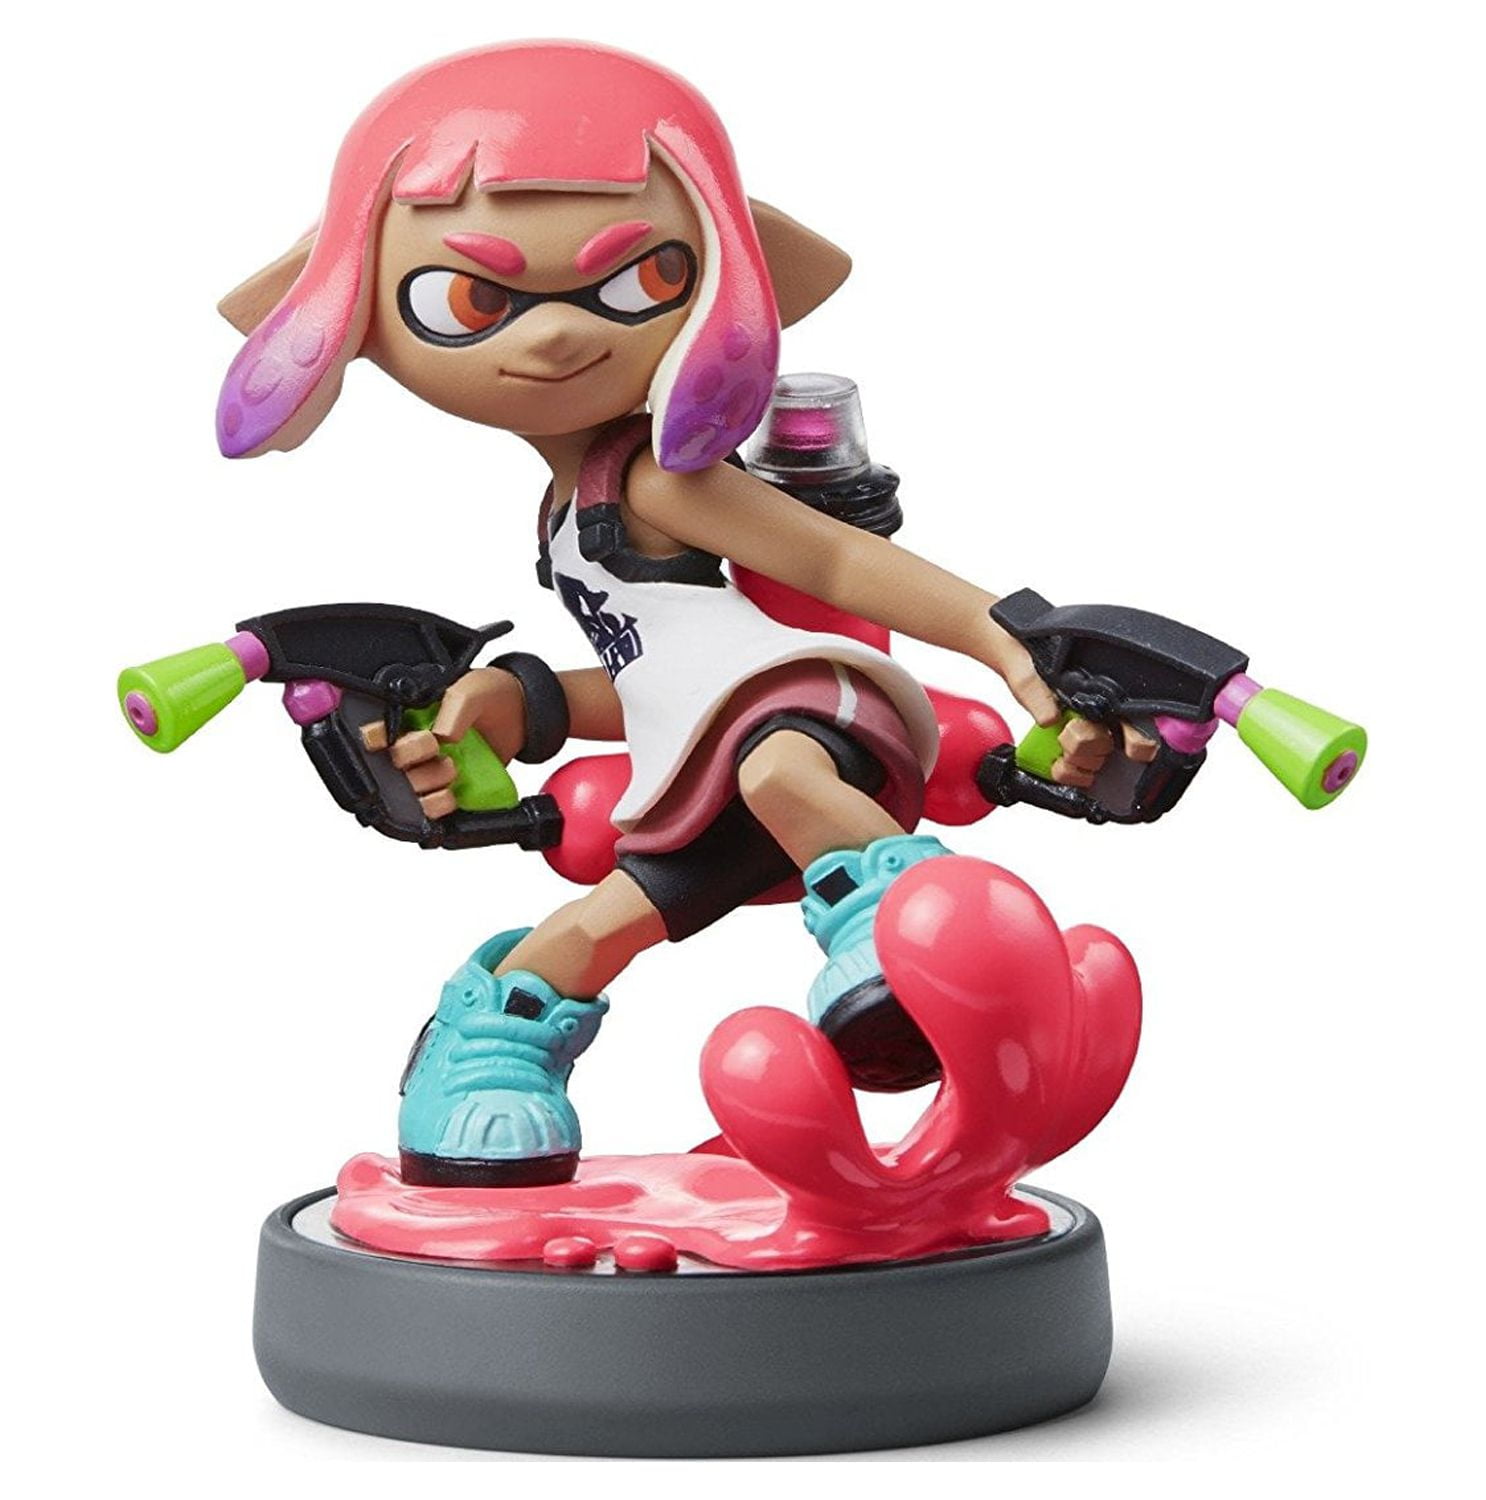 Splatoon 3 Amiibo Are Up For Preorder: Pick Up Big Man, Shiver